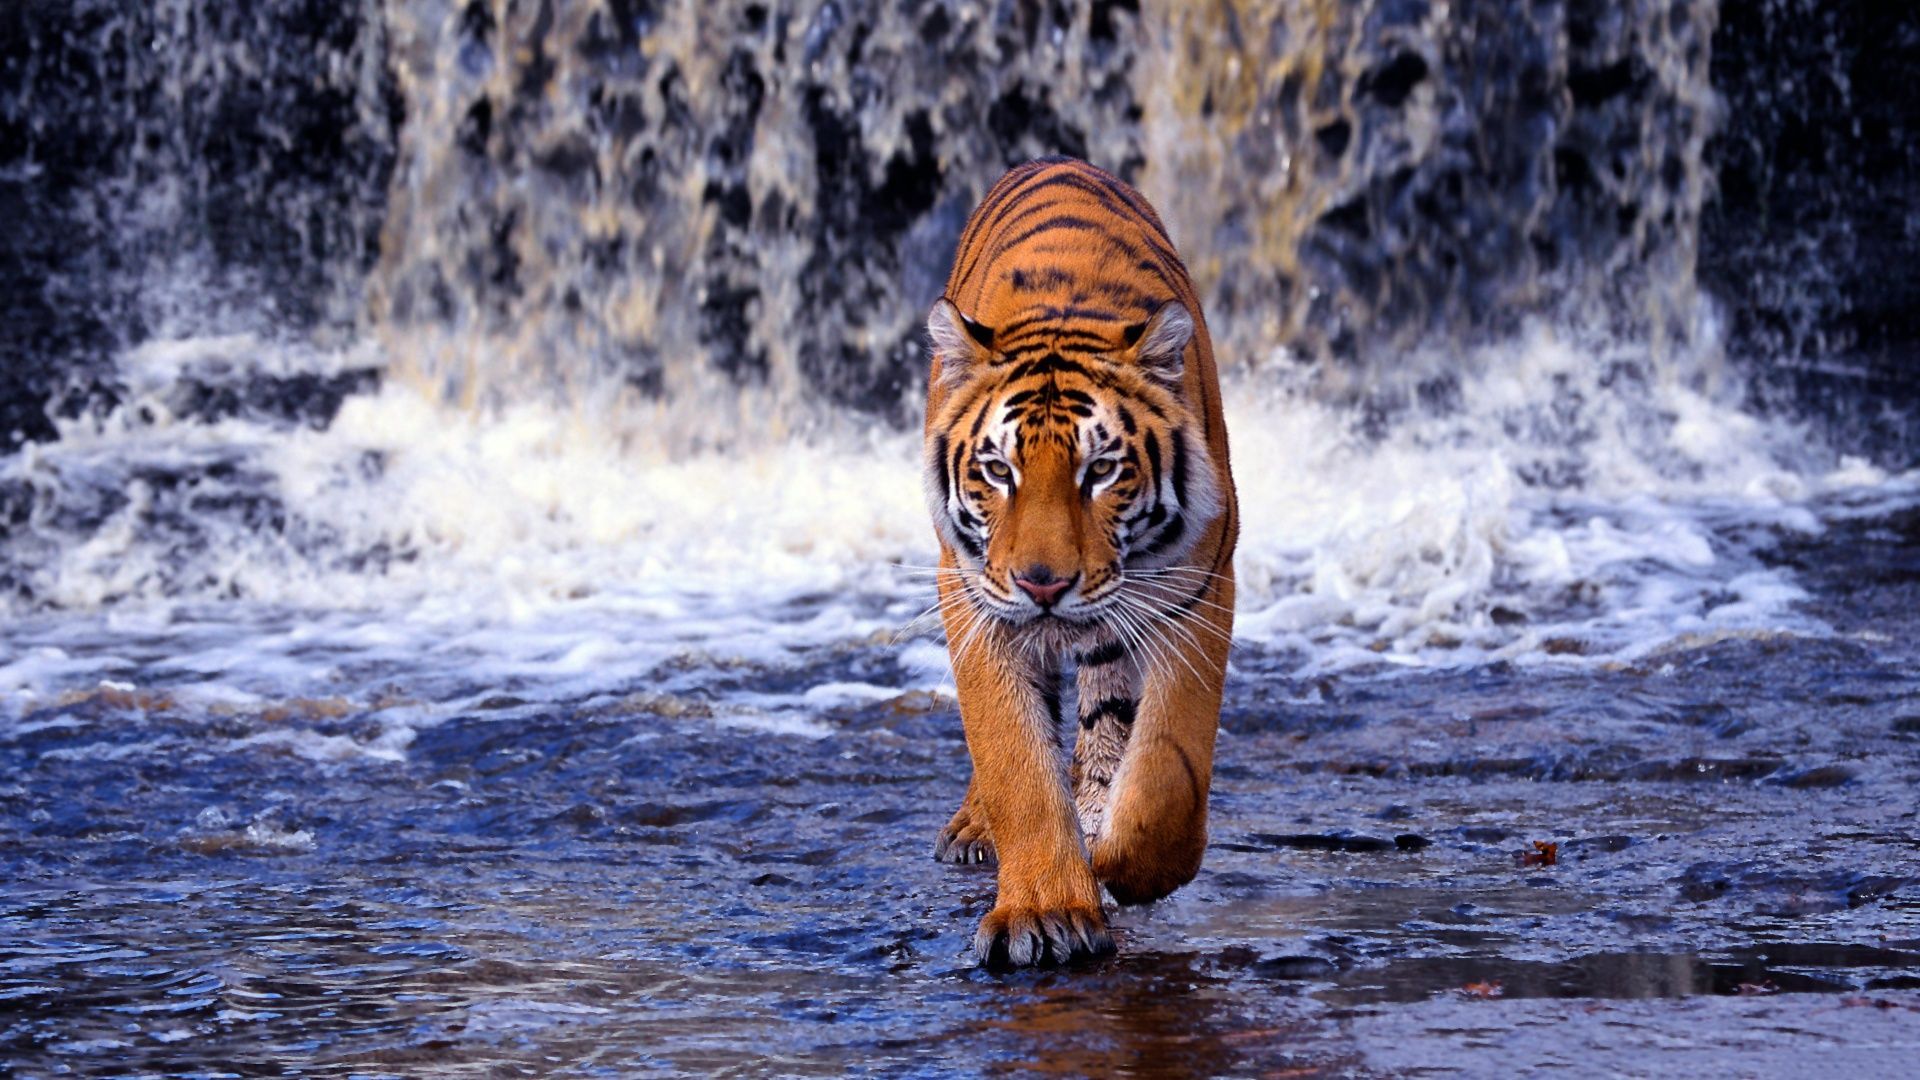 Tiger HD Wallpapers 1920x1080 Group (92+)